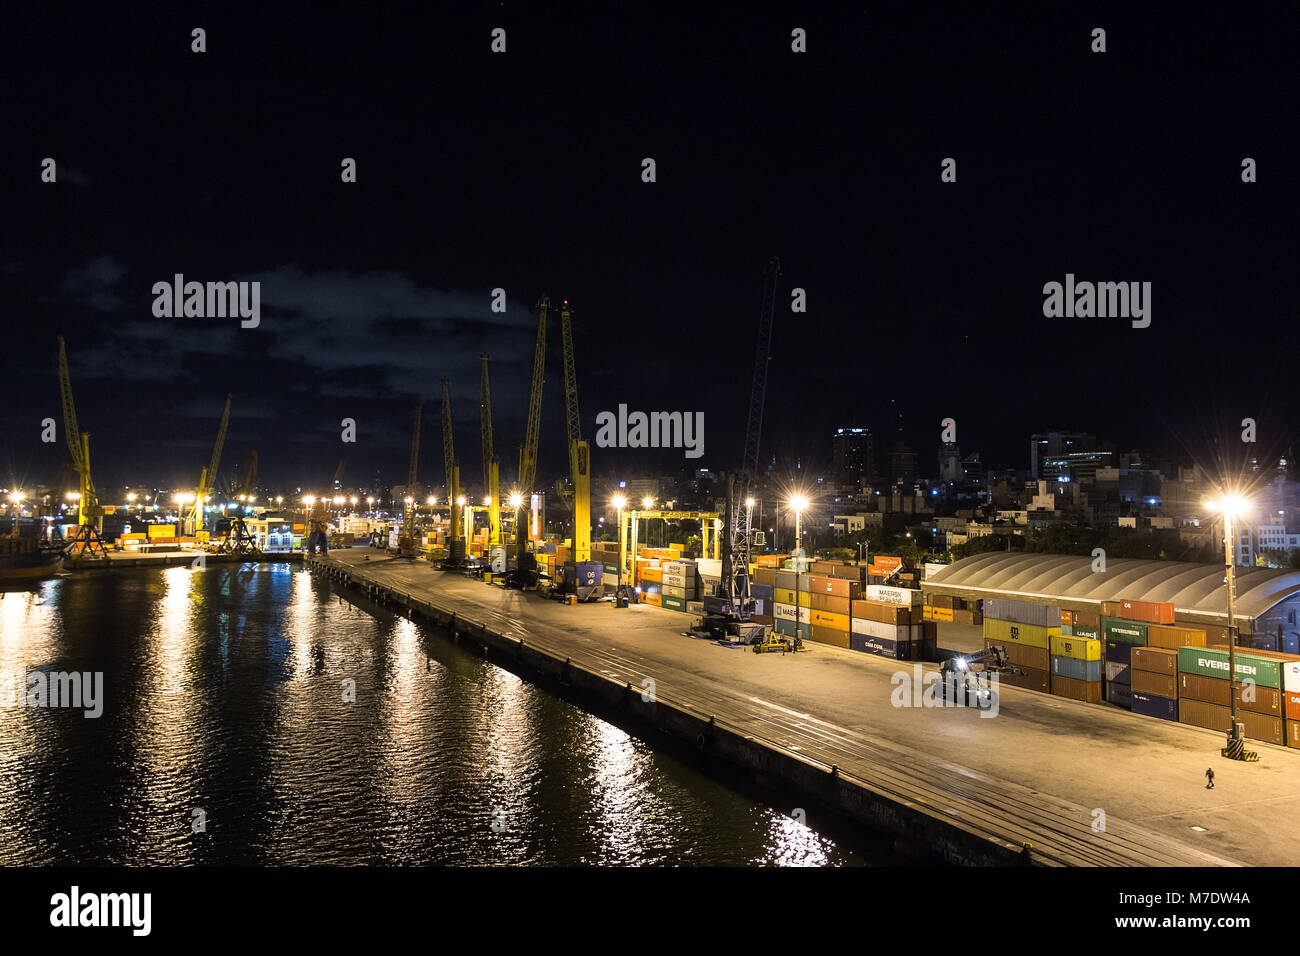 Montevideo, Uruguay - February 25th, 2018: The Port of Montevideo at night in Uruguay, South America. Stock Photo